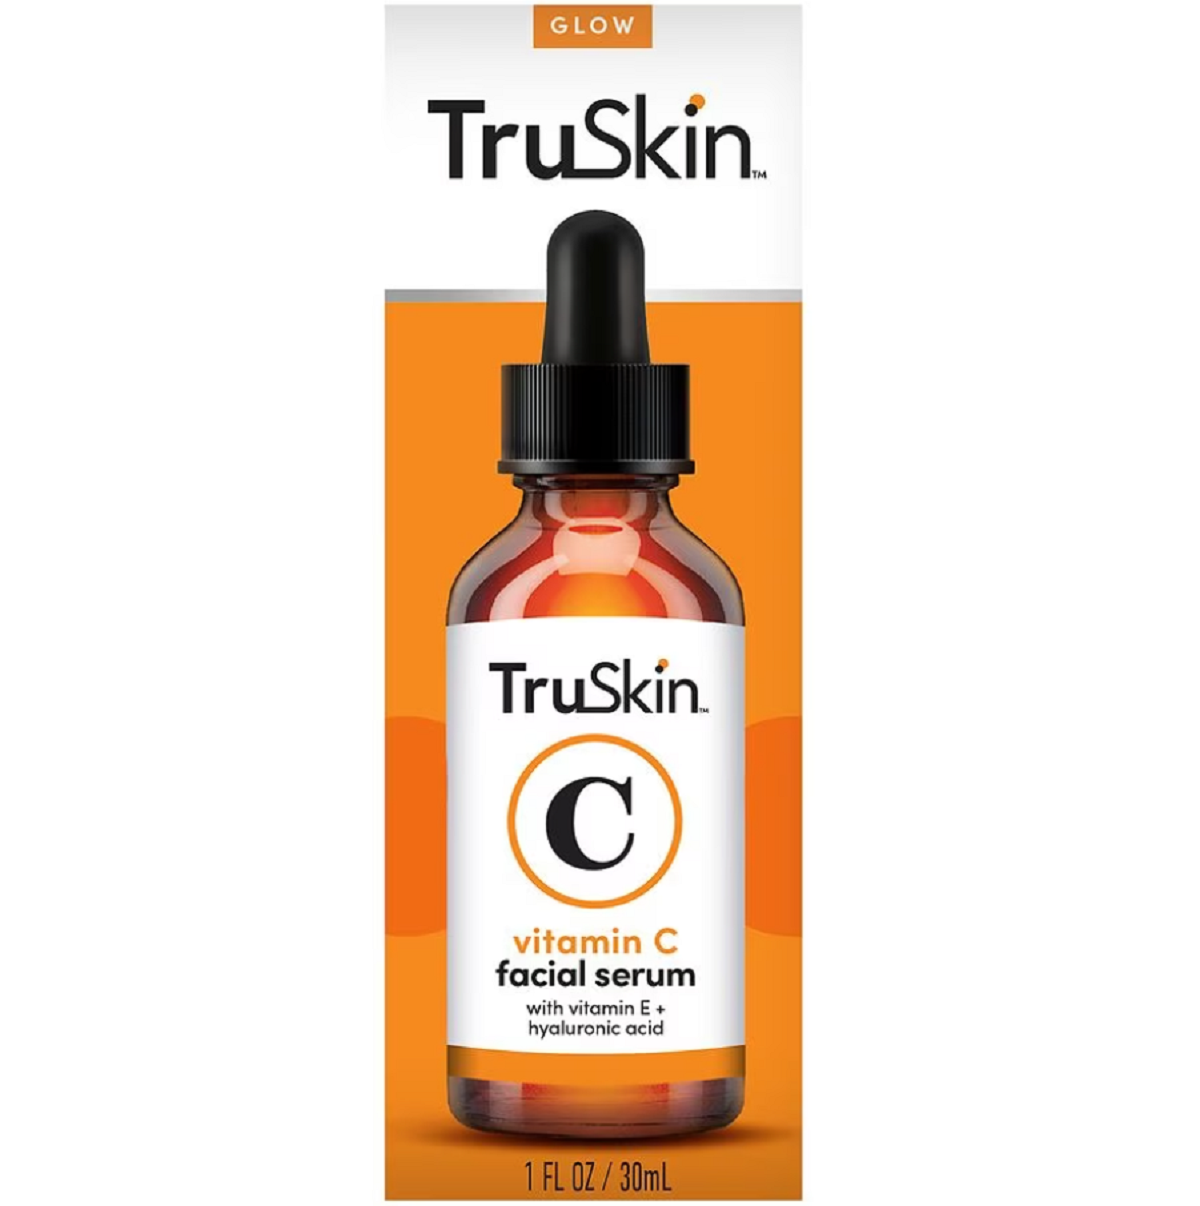 TruSkin Product Printable Coupon, TruSkin Vitamin C Serum for Face